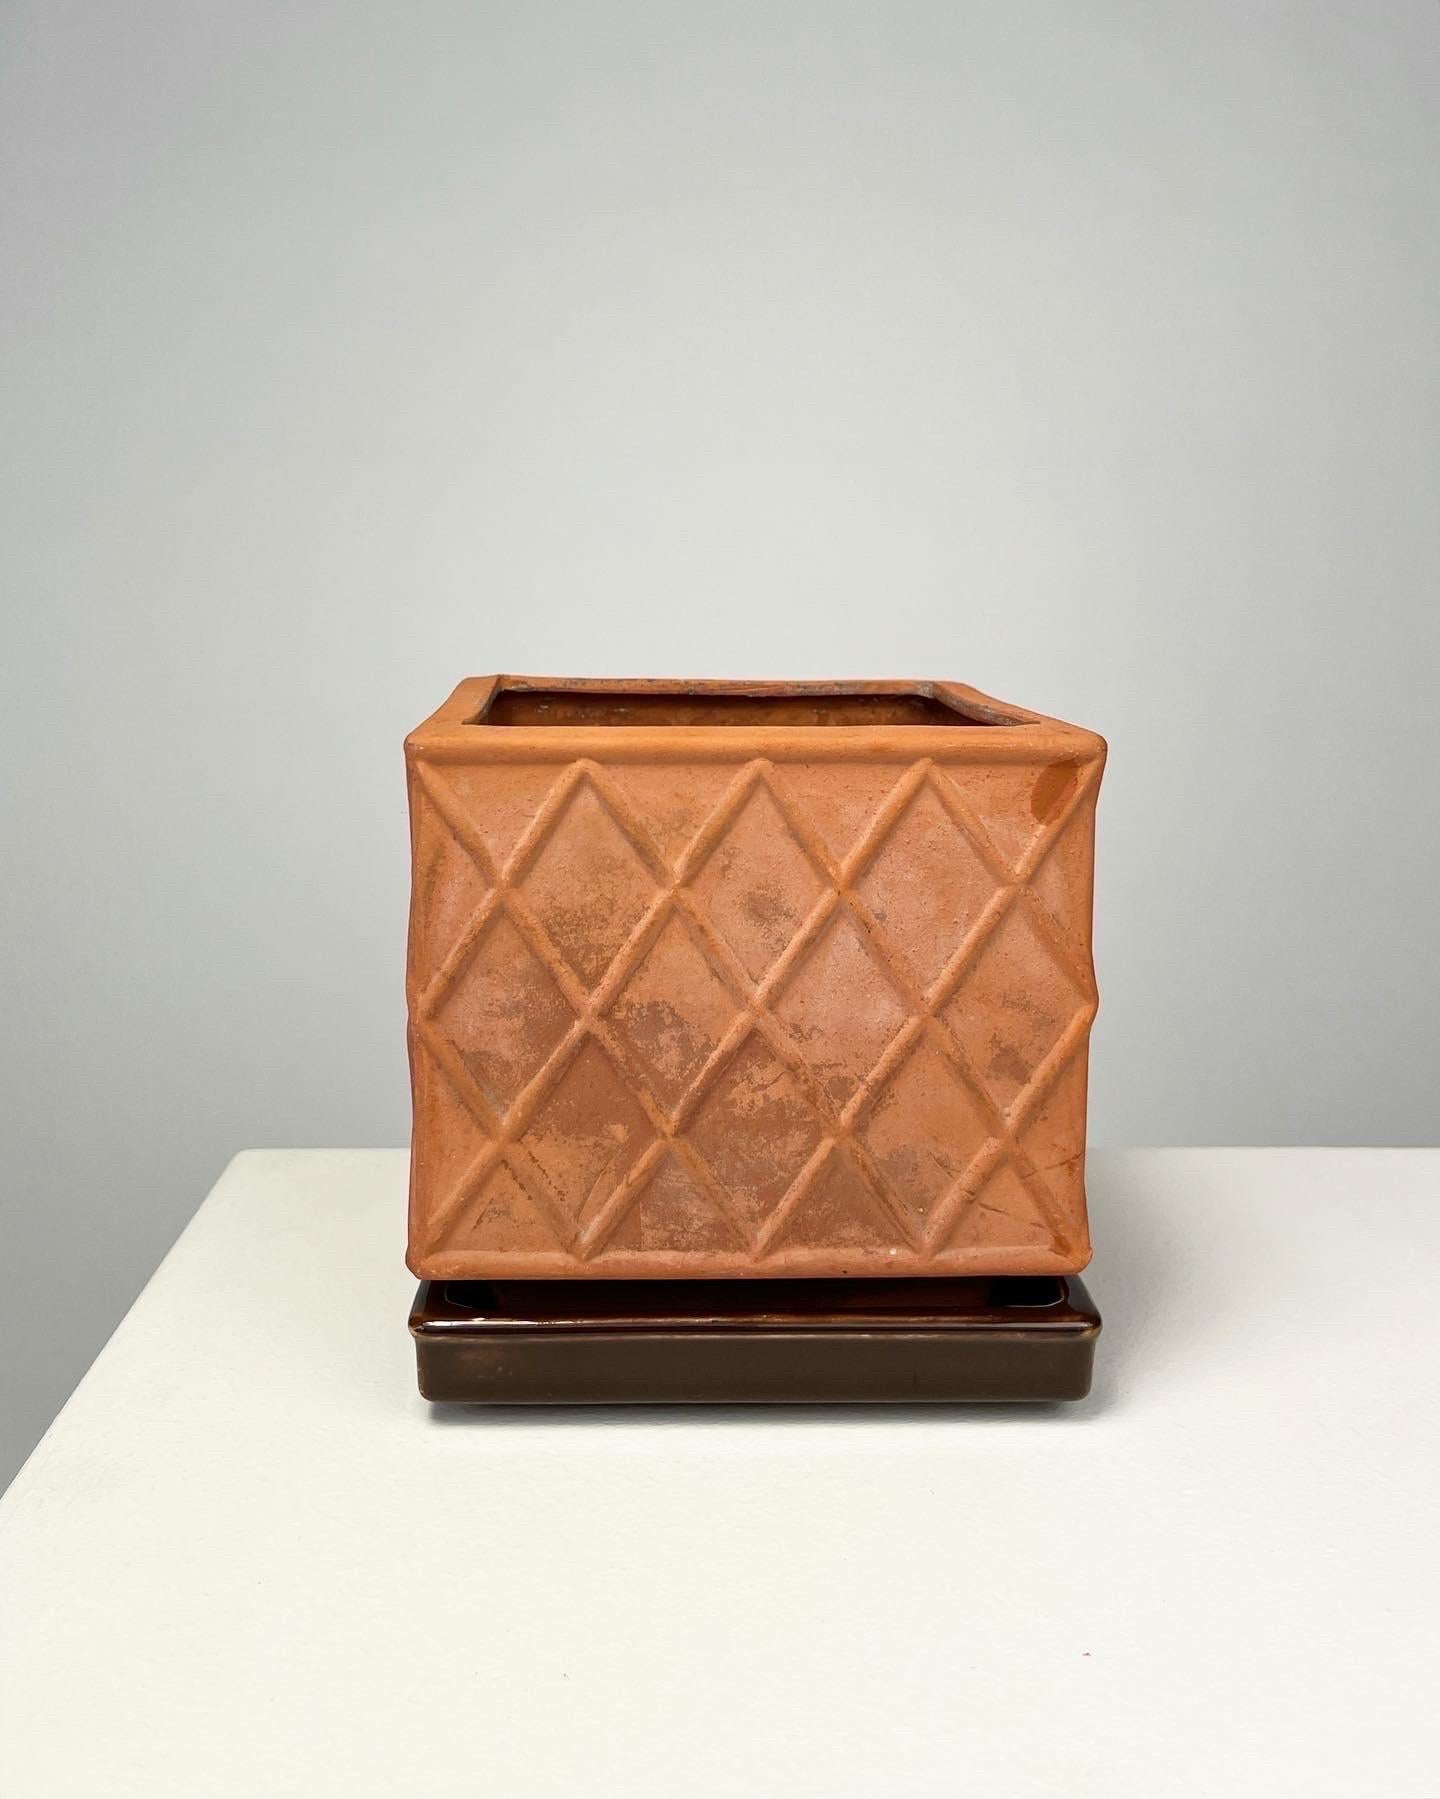 Wilhelm Kåge terracotta planter for Gustavsberg in Sweden, circa 1940s.

Beautiful patinated terracotta with waffle pattern, 

Very good condition with a nice patina and signs of use.

Width: 13 cm x 13 cm
Height: 13.5 cm